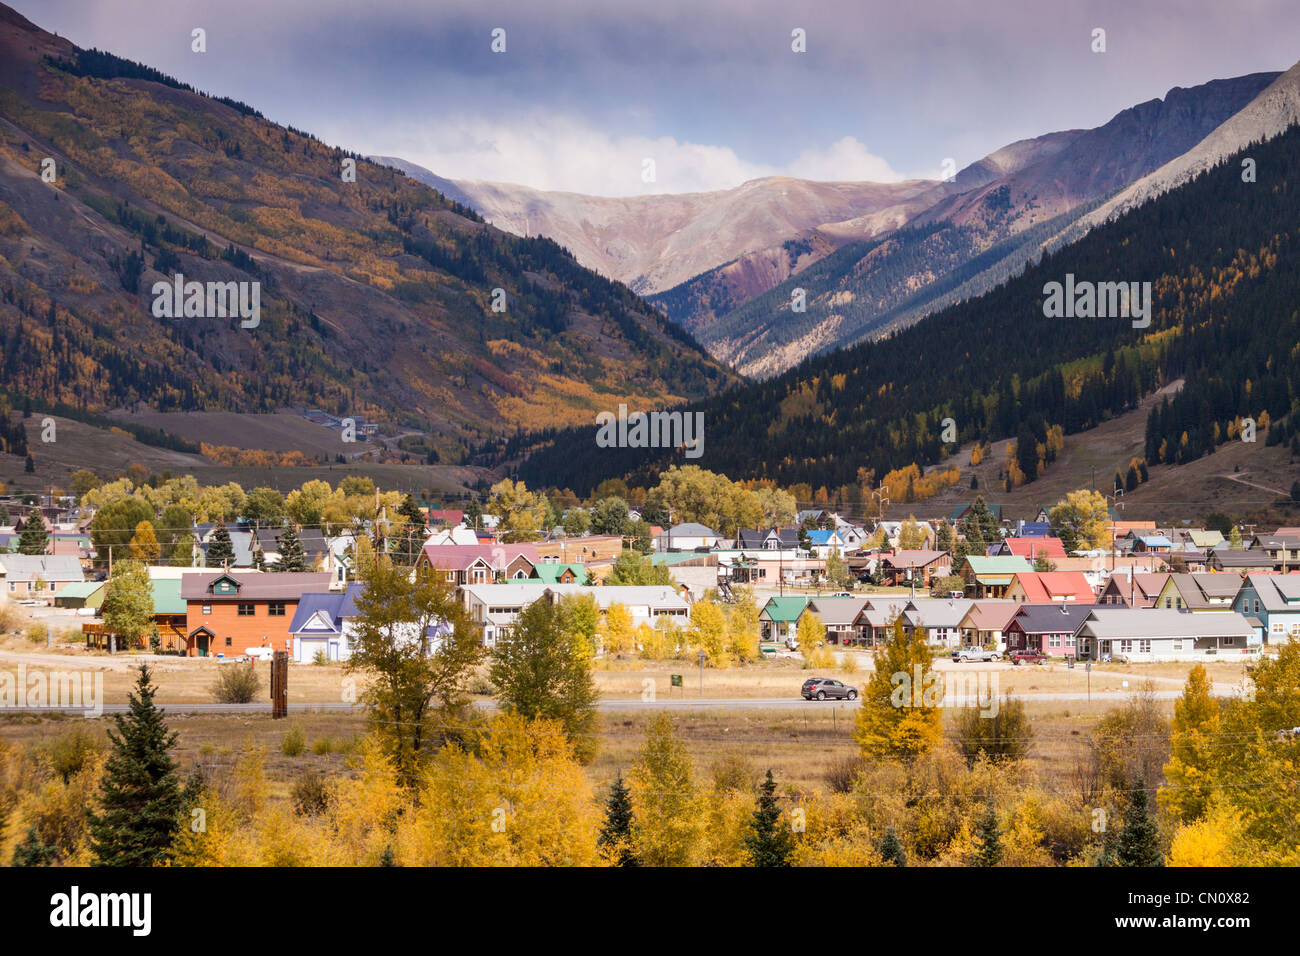 Colorful historic buildings in the old mining town of Silverton, Colorado, in autumn. Stock Photo